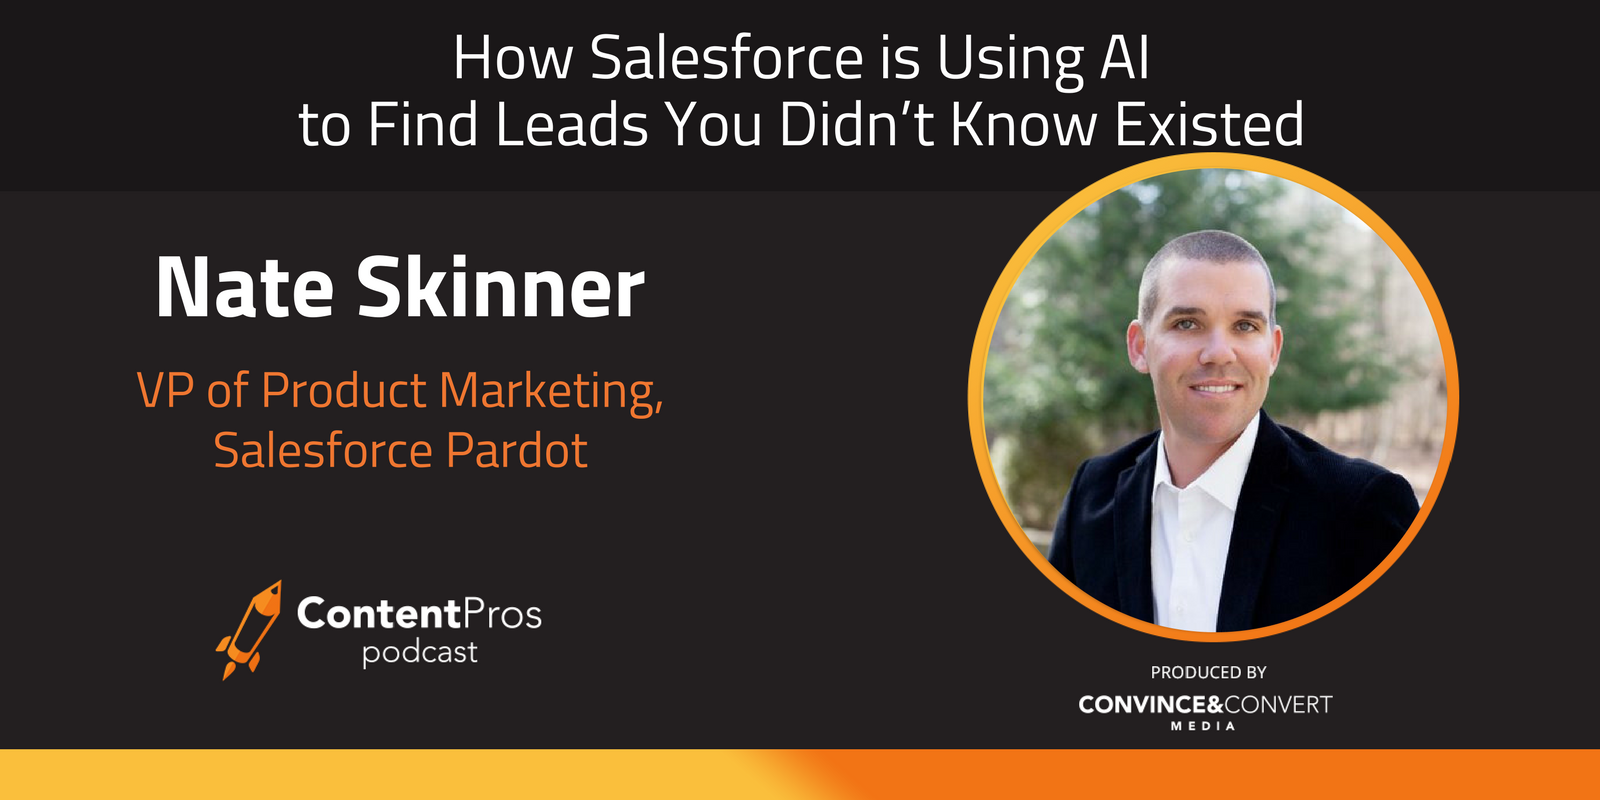 How Salesforce is Using AI to Find Leads You Didn’t Know Existed